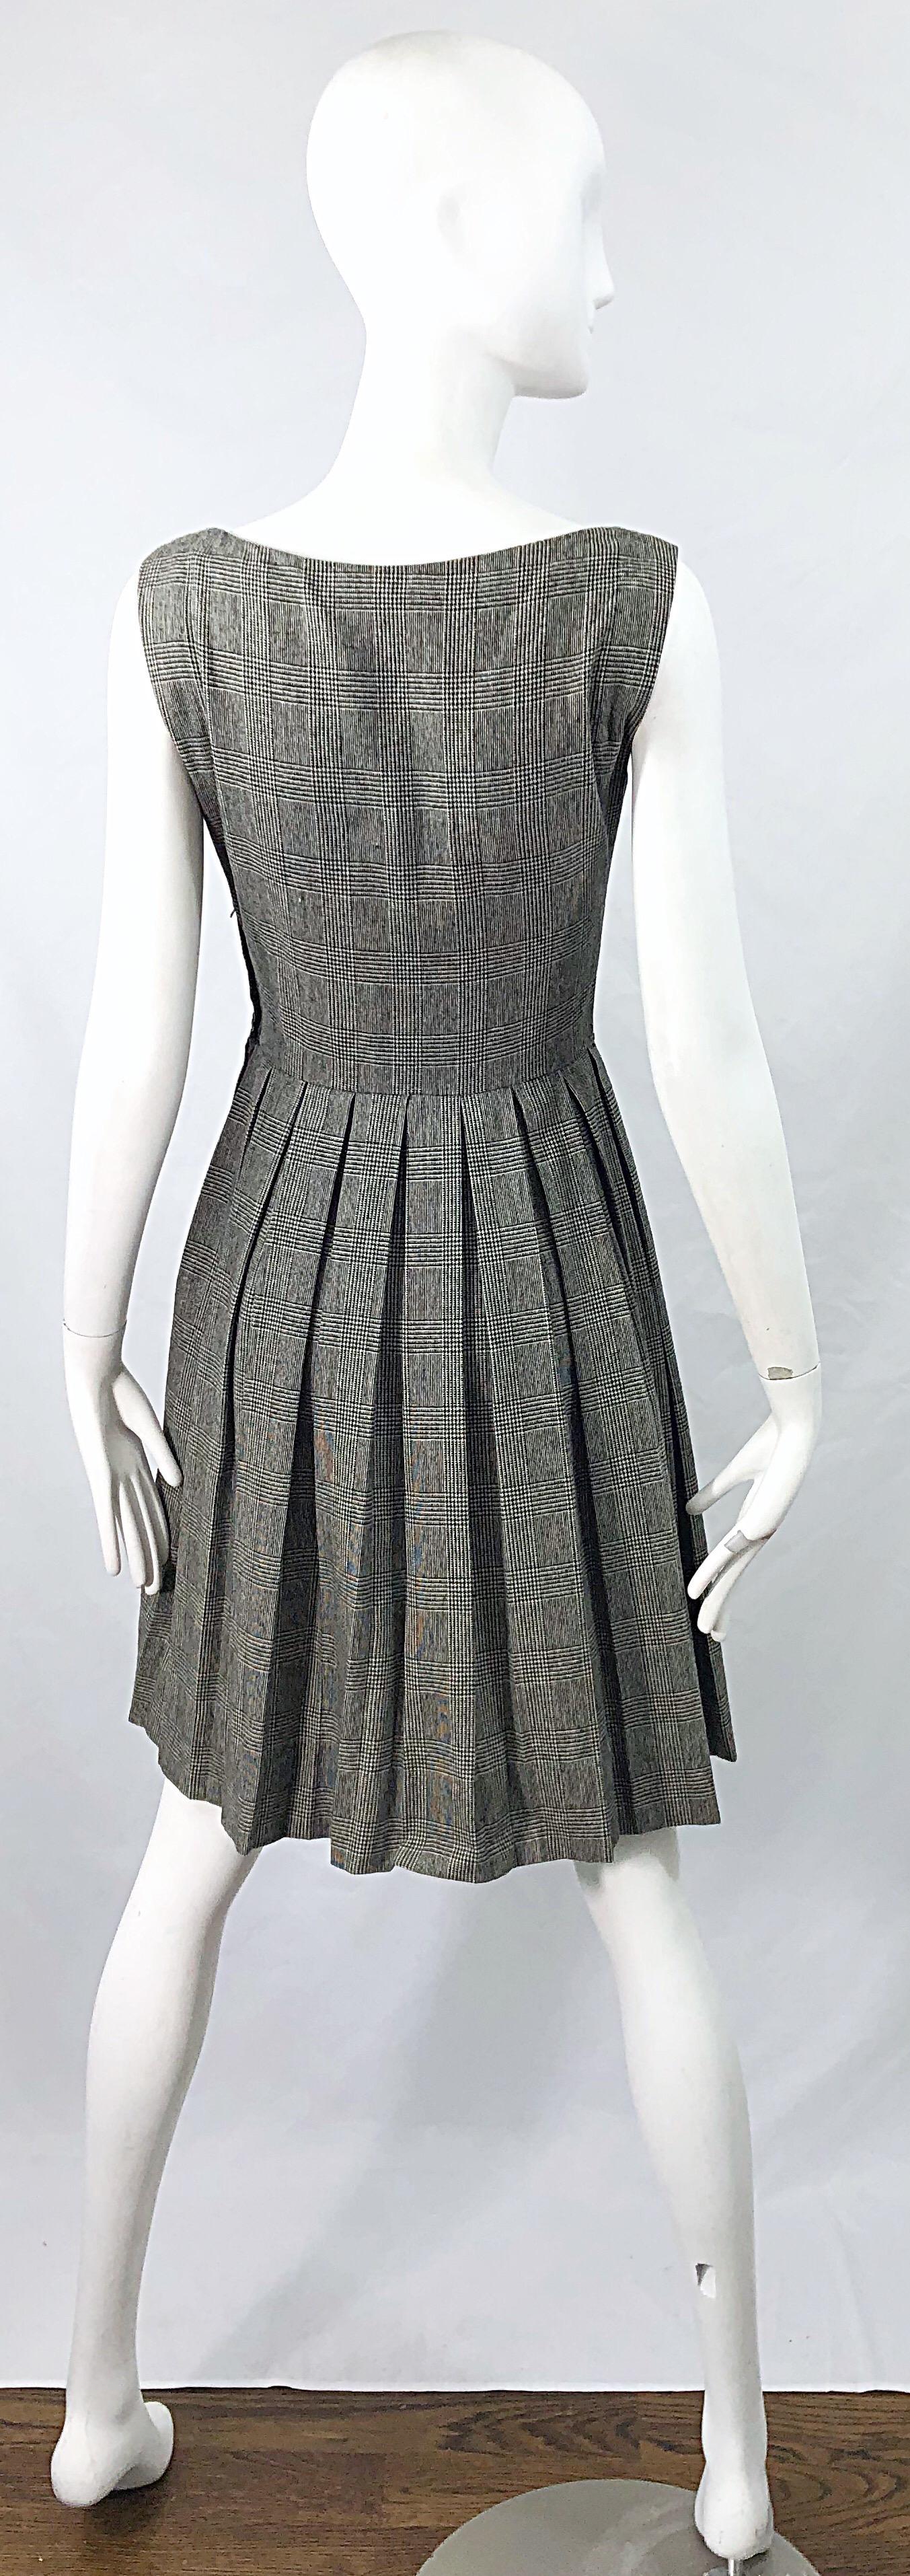 1950s Patty Woodard Black + White Houndstooth Plaid Vintage 50s Fit Flare Dress 3